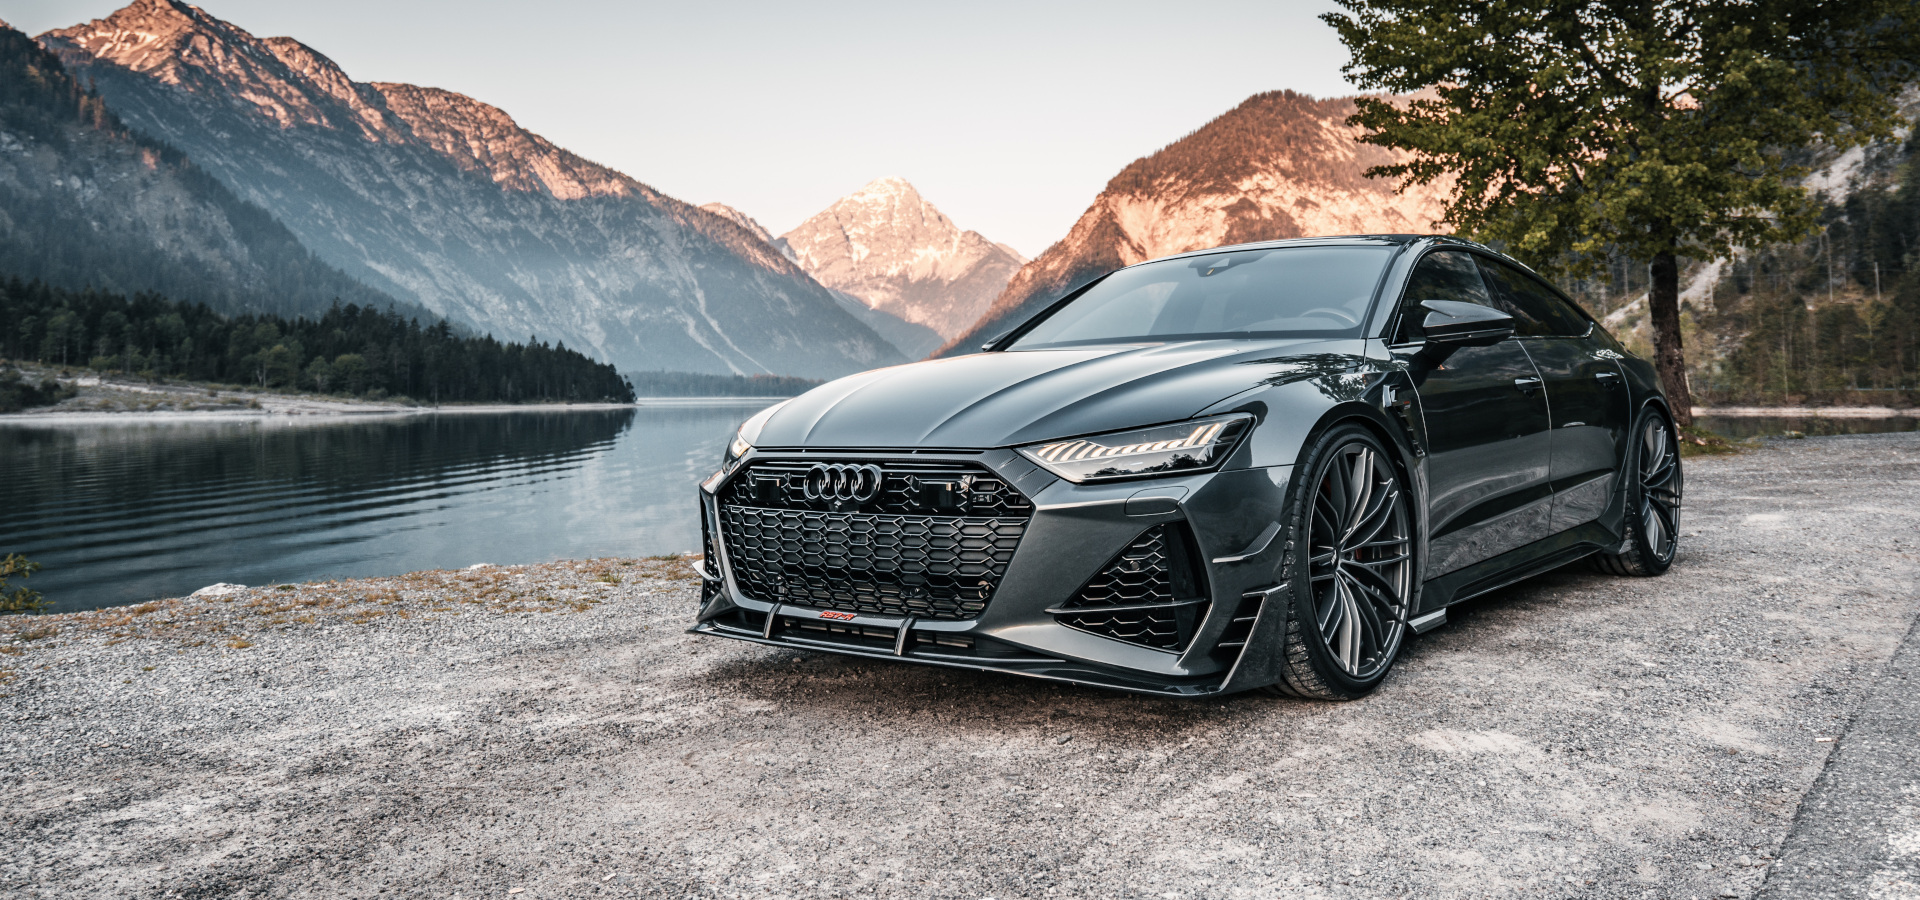 Abt Rs7 R Abt Sportsline